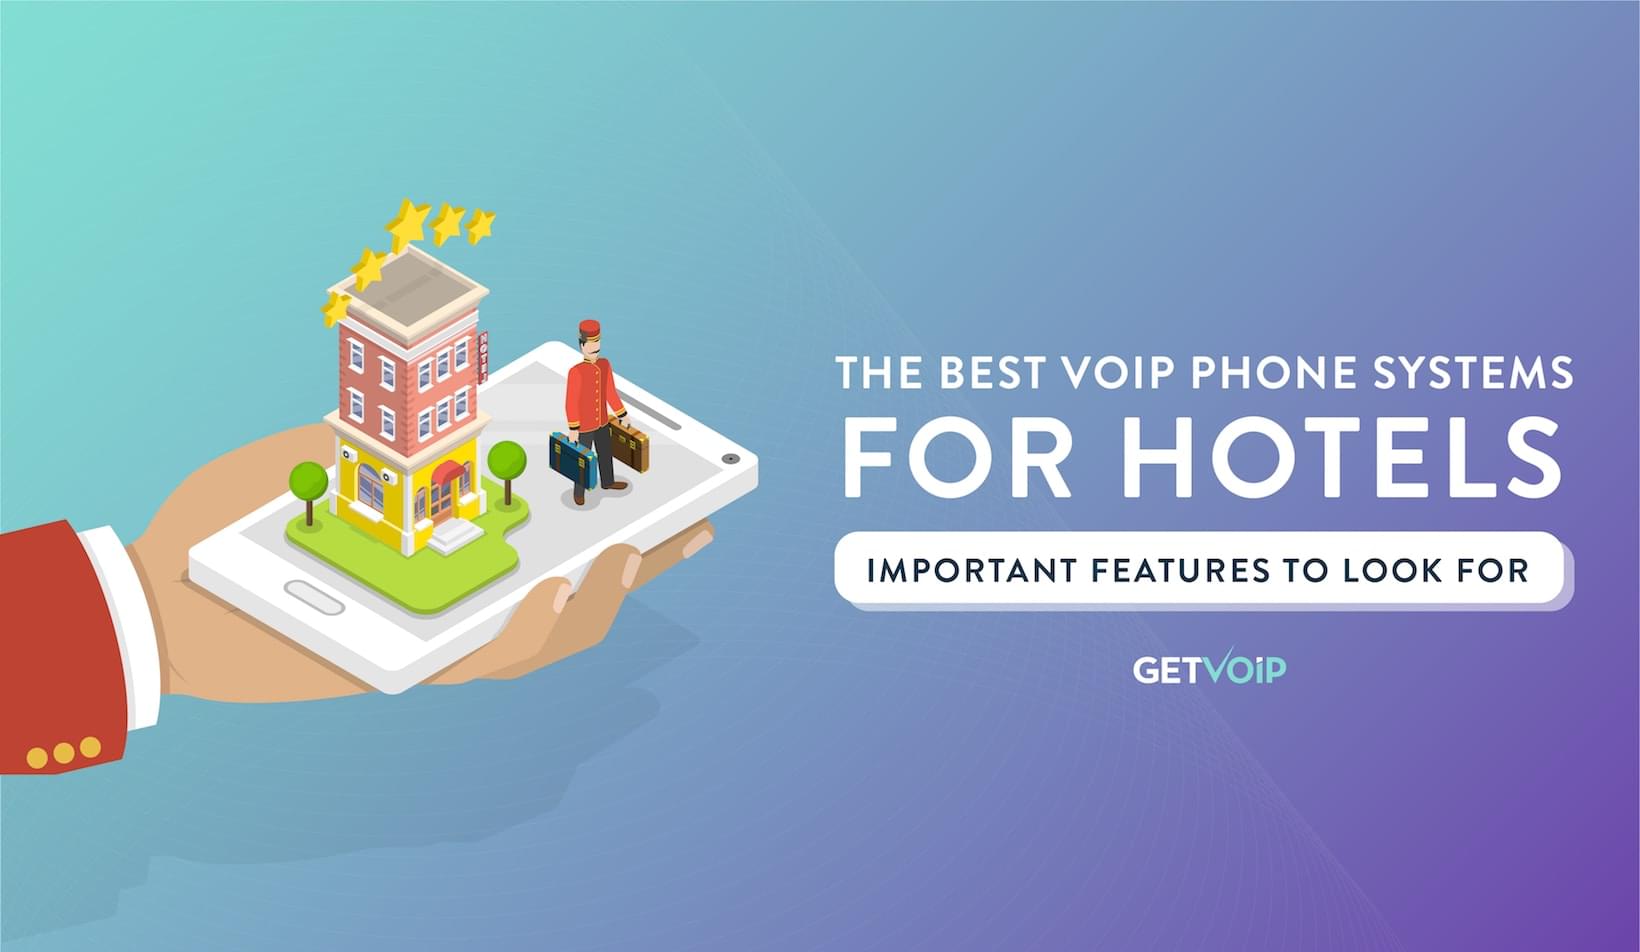 The Best VoIP Phone Systems for Hotels and Important Features to Look For